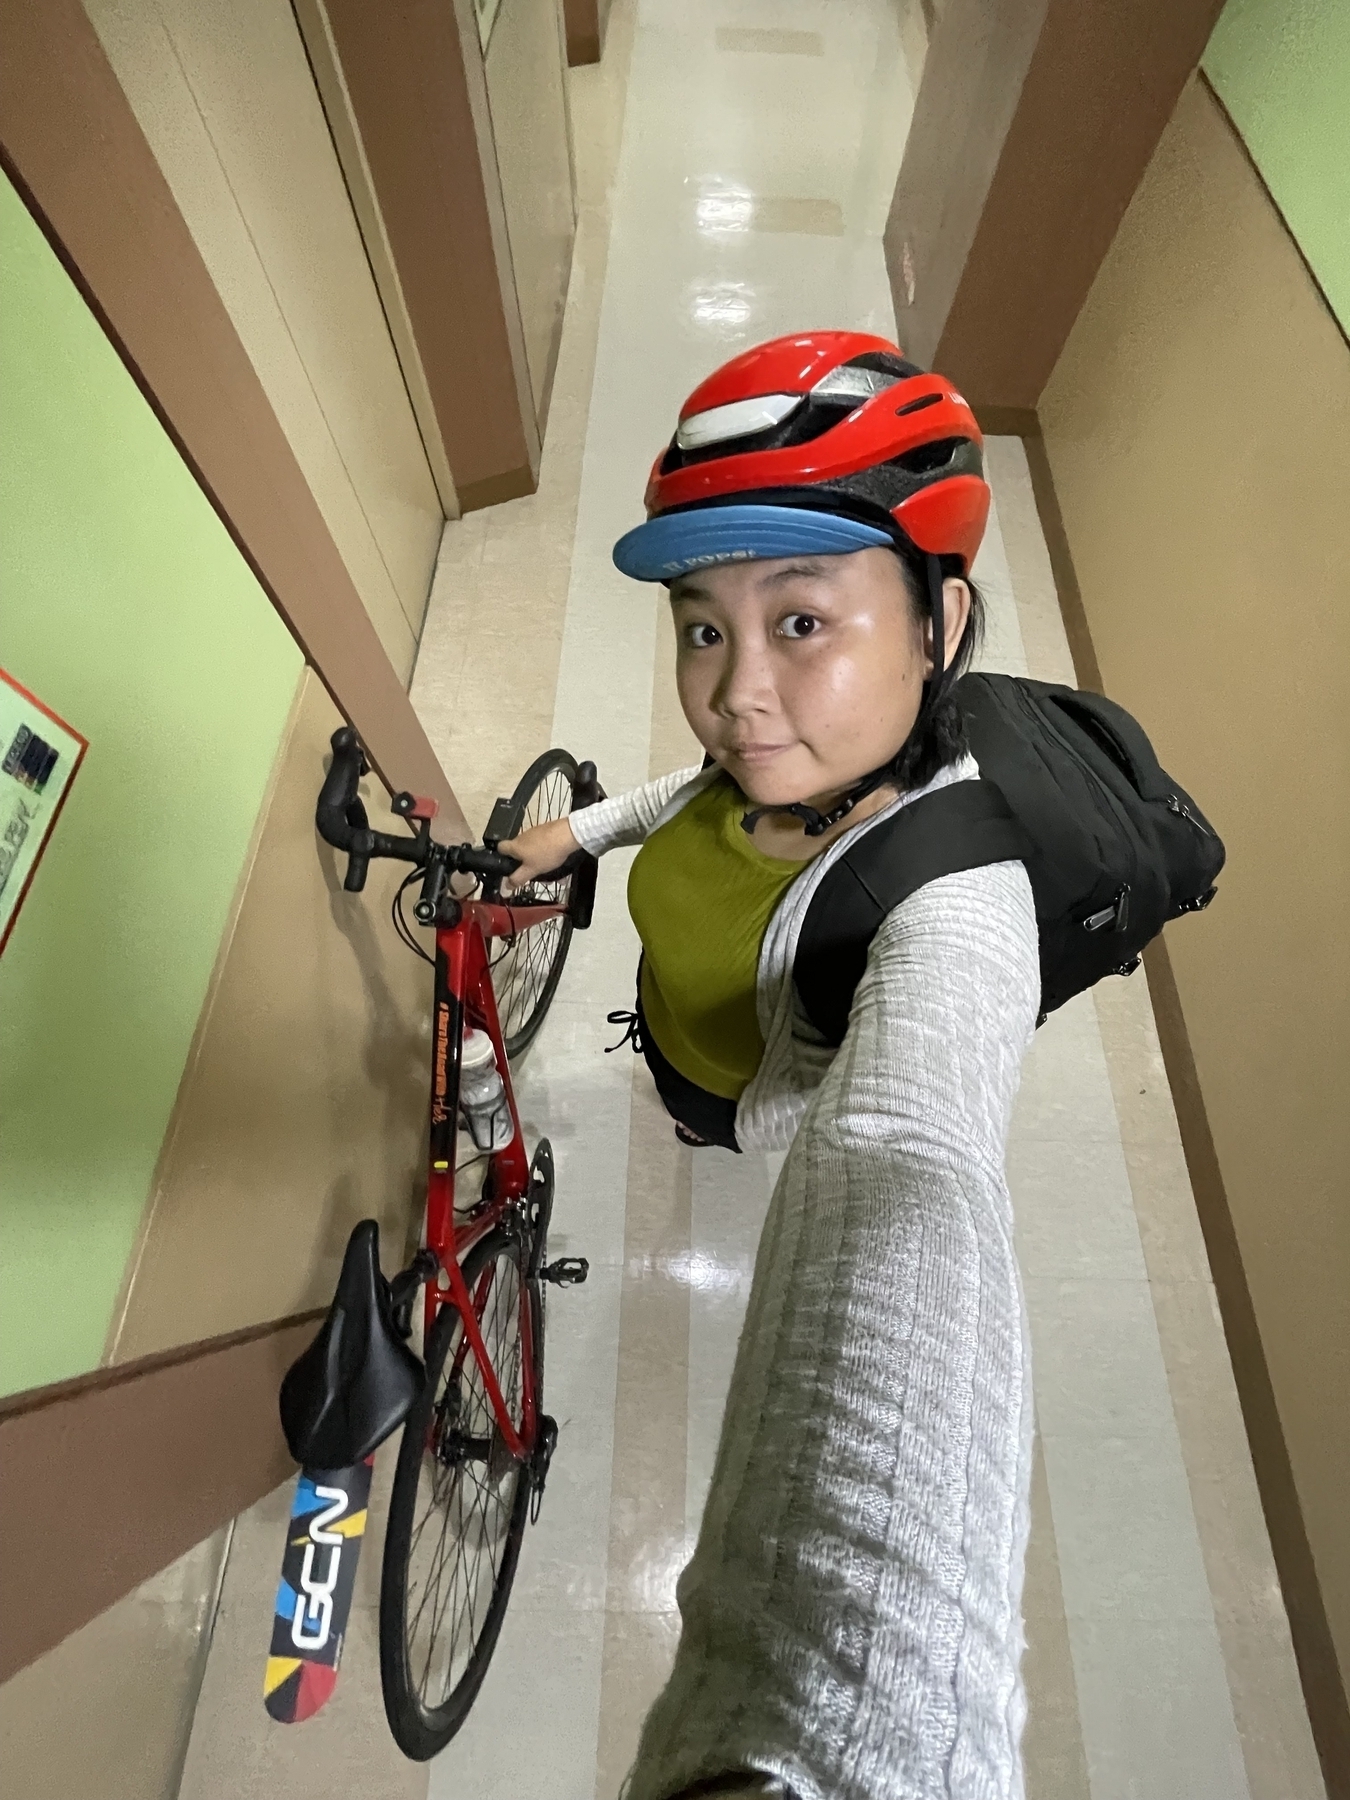 Wide angle selfie of Chi in her bike commute getup: she is wearing her normal, casual clothes, and has her backpack on which contains her Mac, her iPad, and other essentials. She is holding onto her red Merida road bike, which is also leaning towards the wall. She has her red Lumos helmet on, and a blue cycling cap.